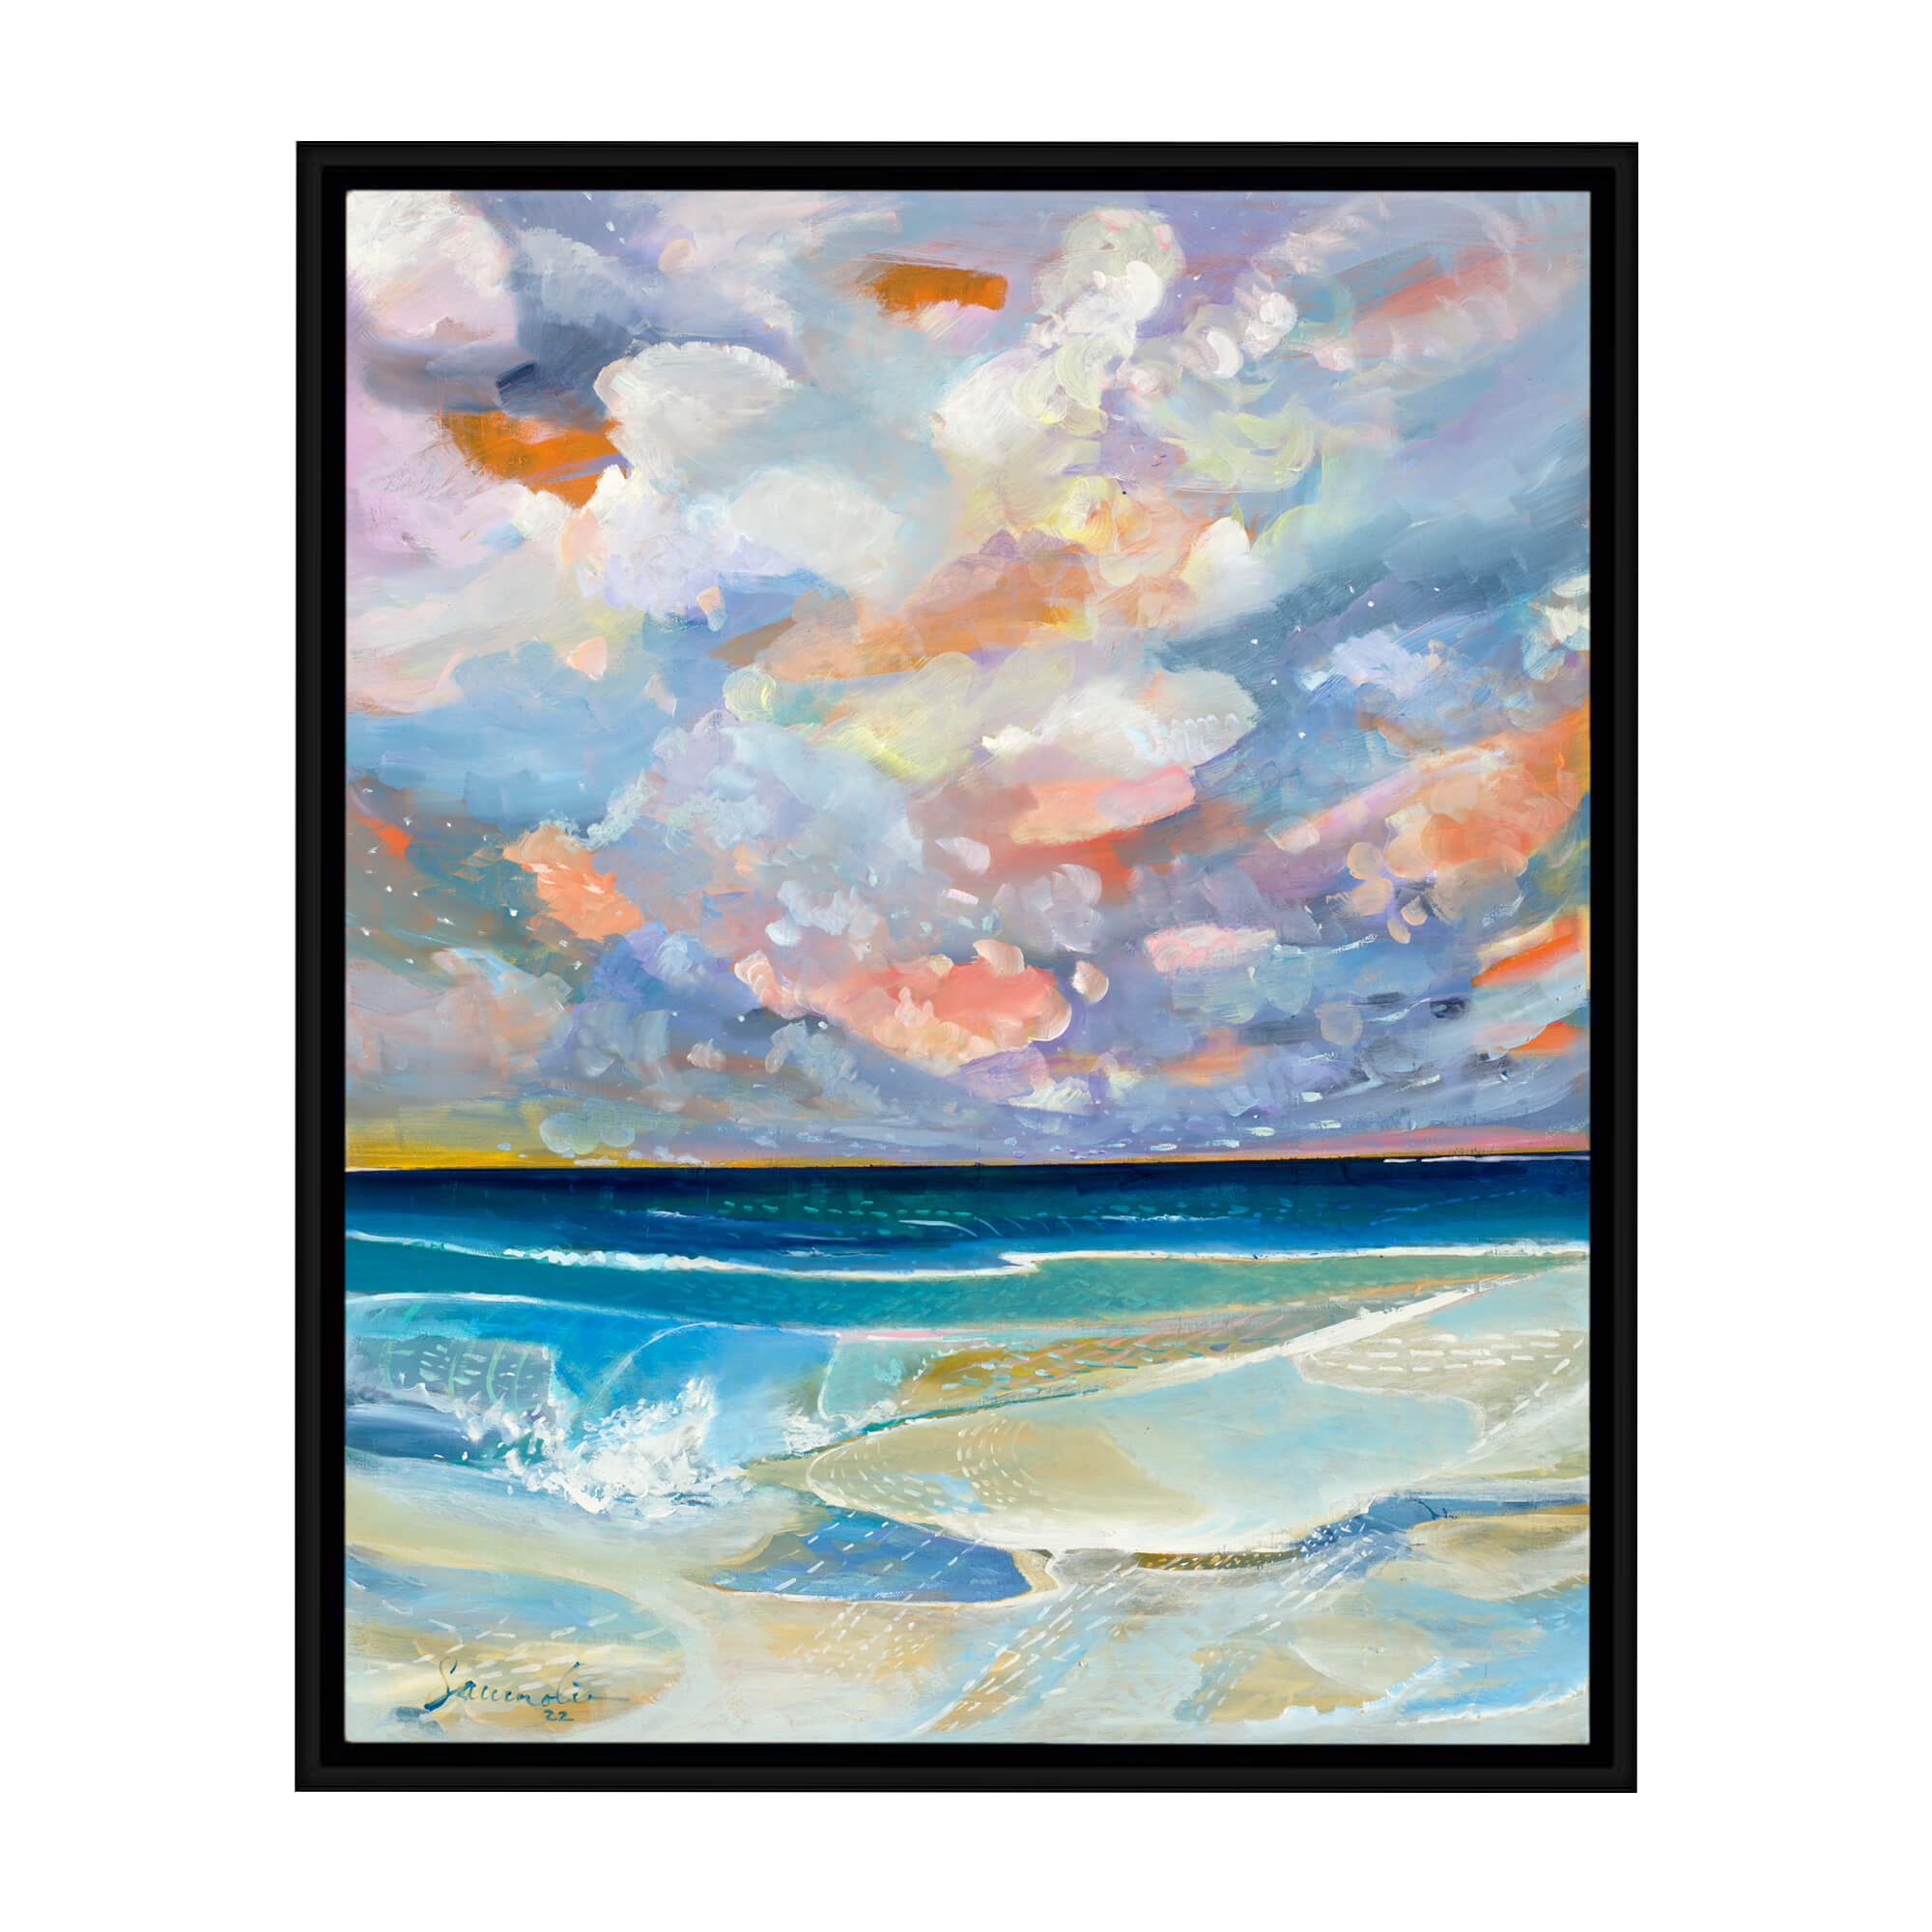 A framed canvas giclée art print featuring abstract teal and blue tinted waves crashing towards the shore by popular Hawaii artist Saumolia Puapuaga